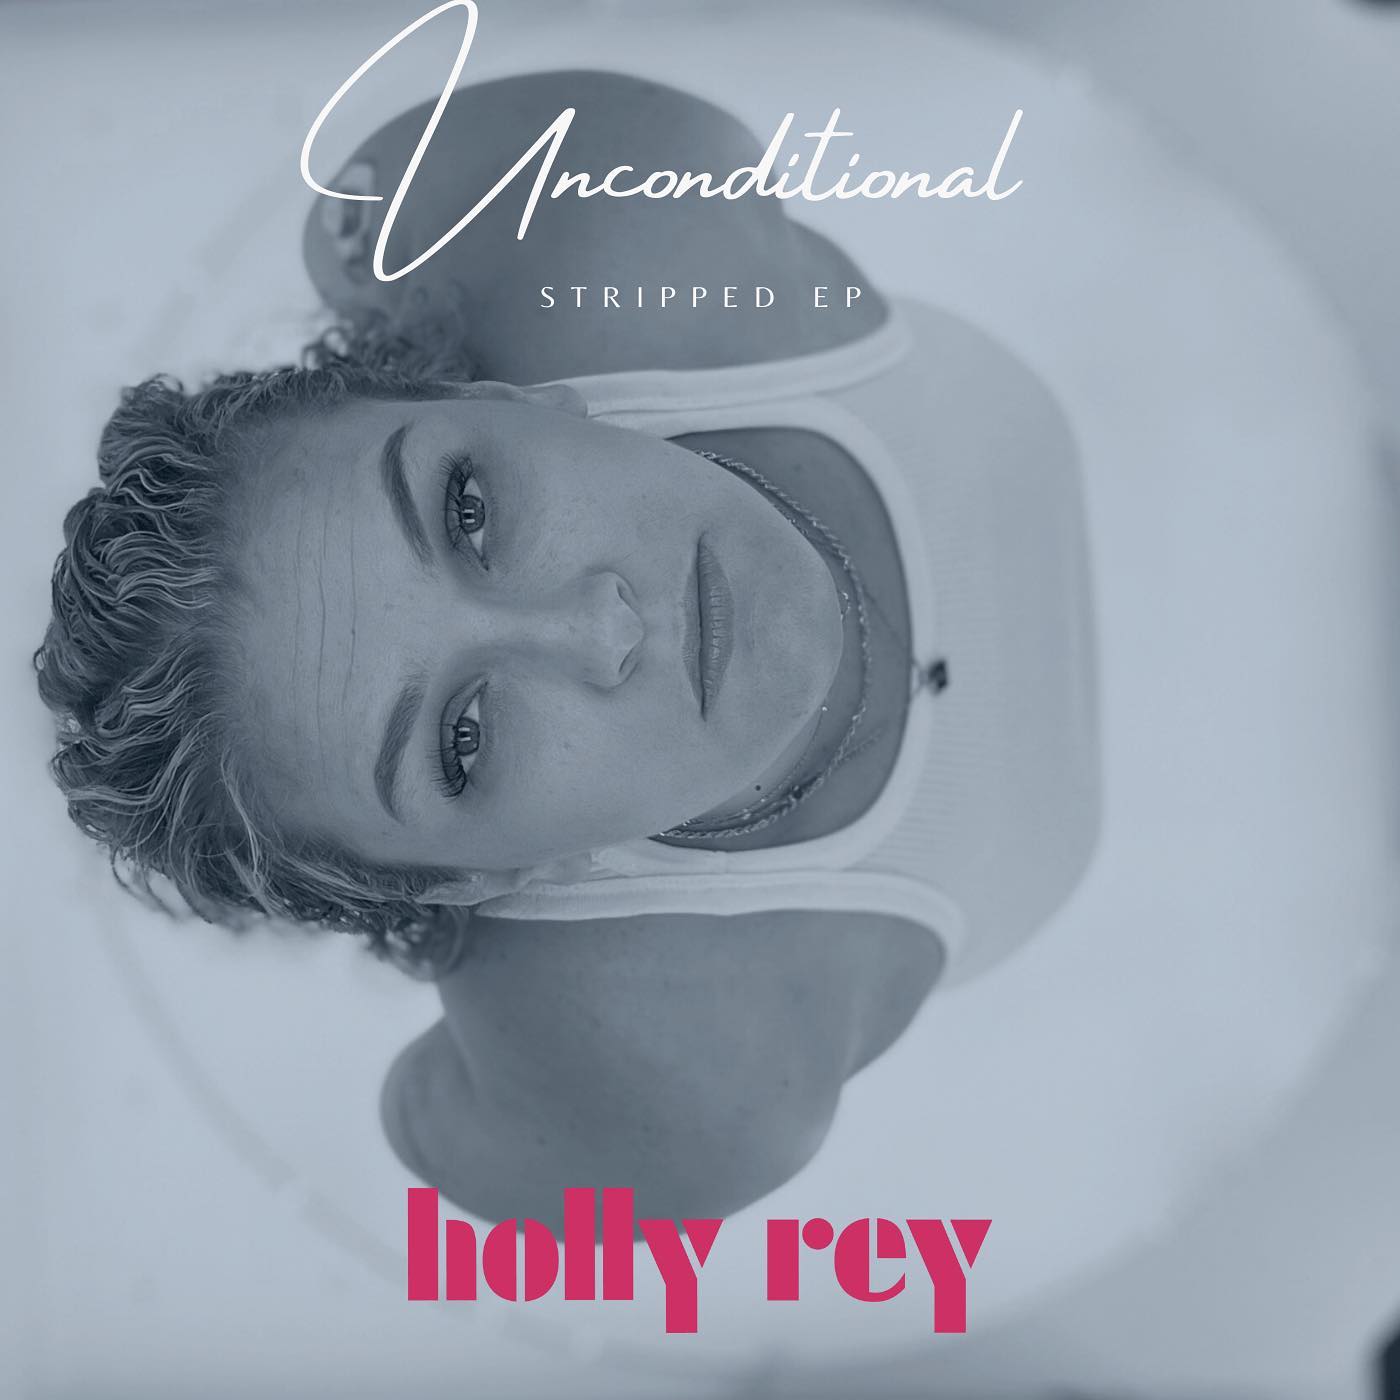 Holly Rey – Another Existence